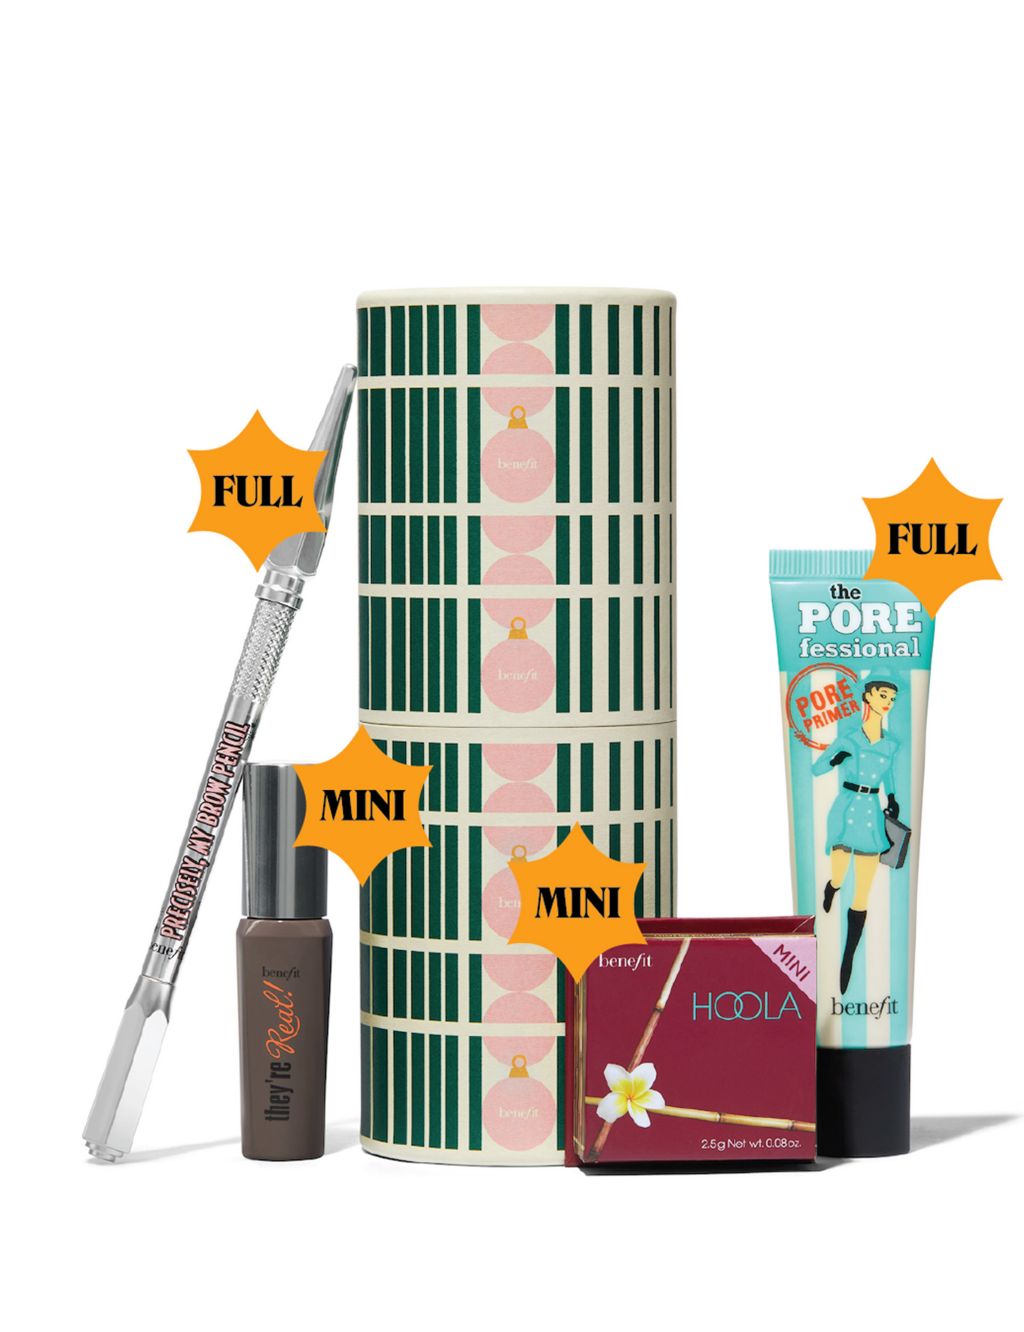 Giftin Goodies They're Real Mascara, Hoola Bronzer, Porefessional Primer & Precisely My Brow Pencil Gift Set (Worth £84.50) 7 of 7